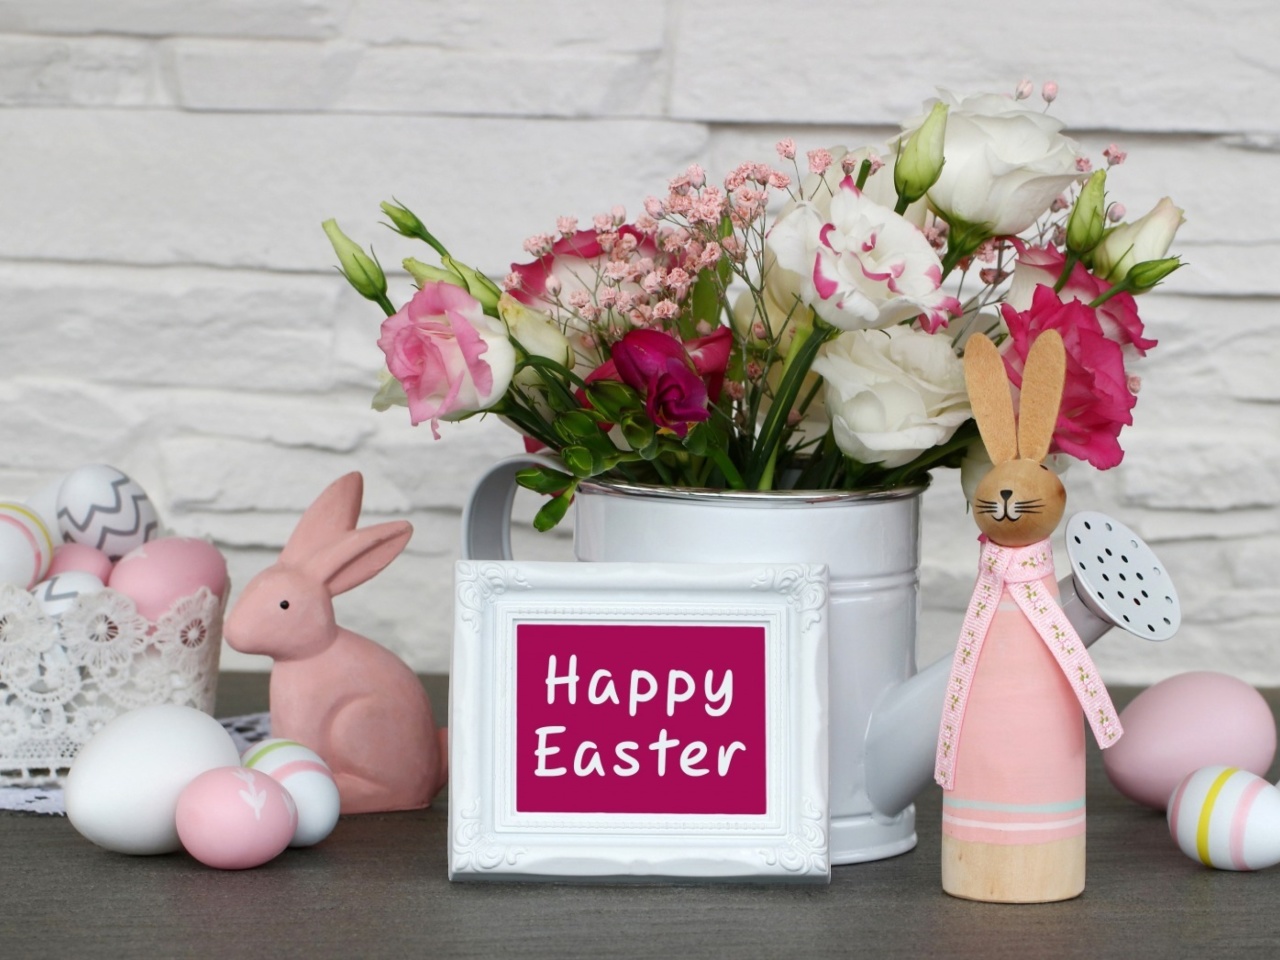 Das Happy Easter with Hare Figures Wallpaper 1280x960